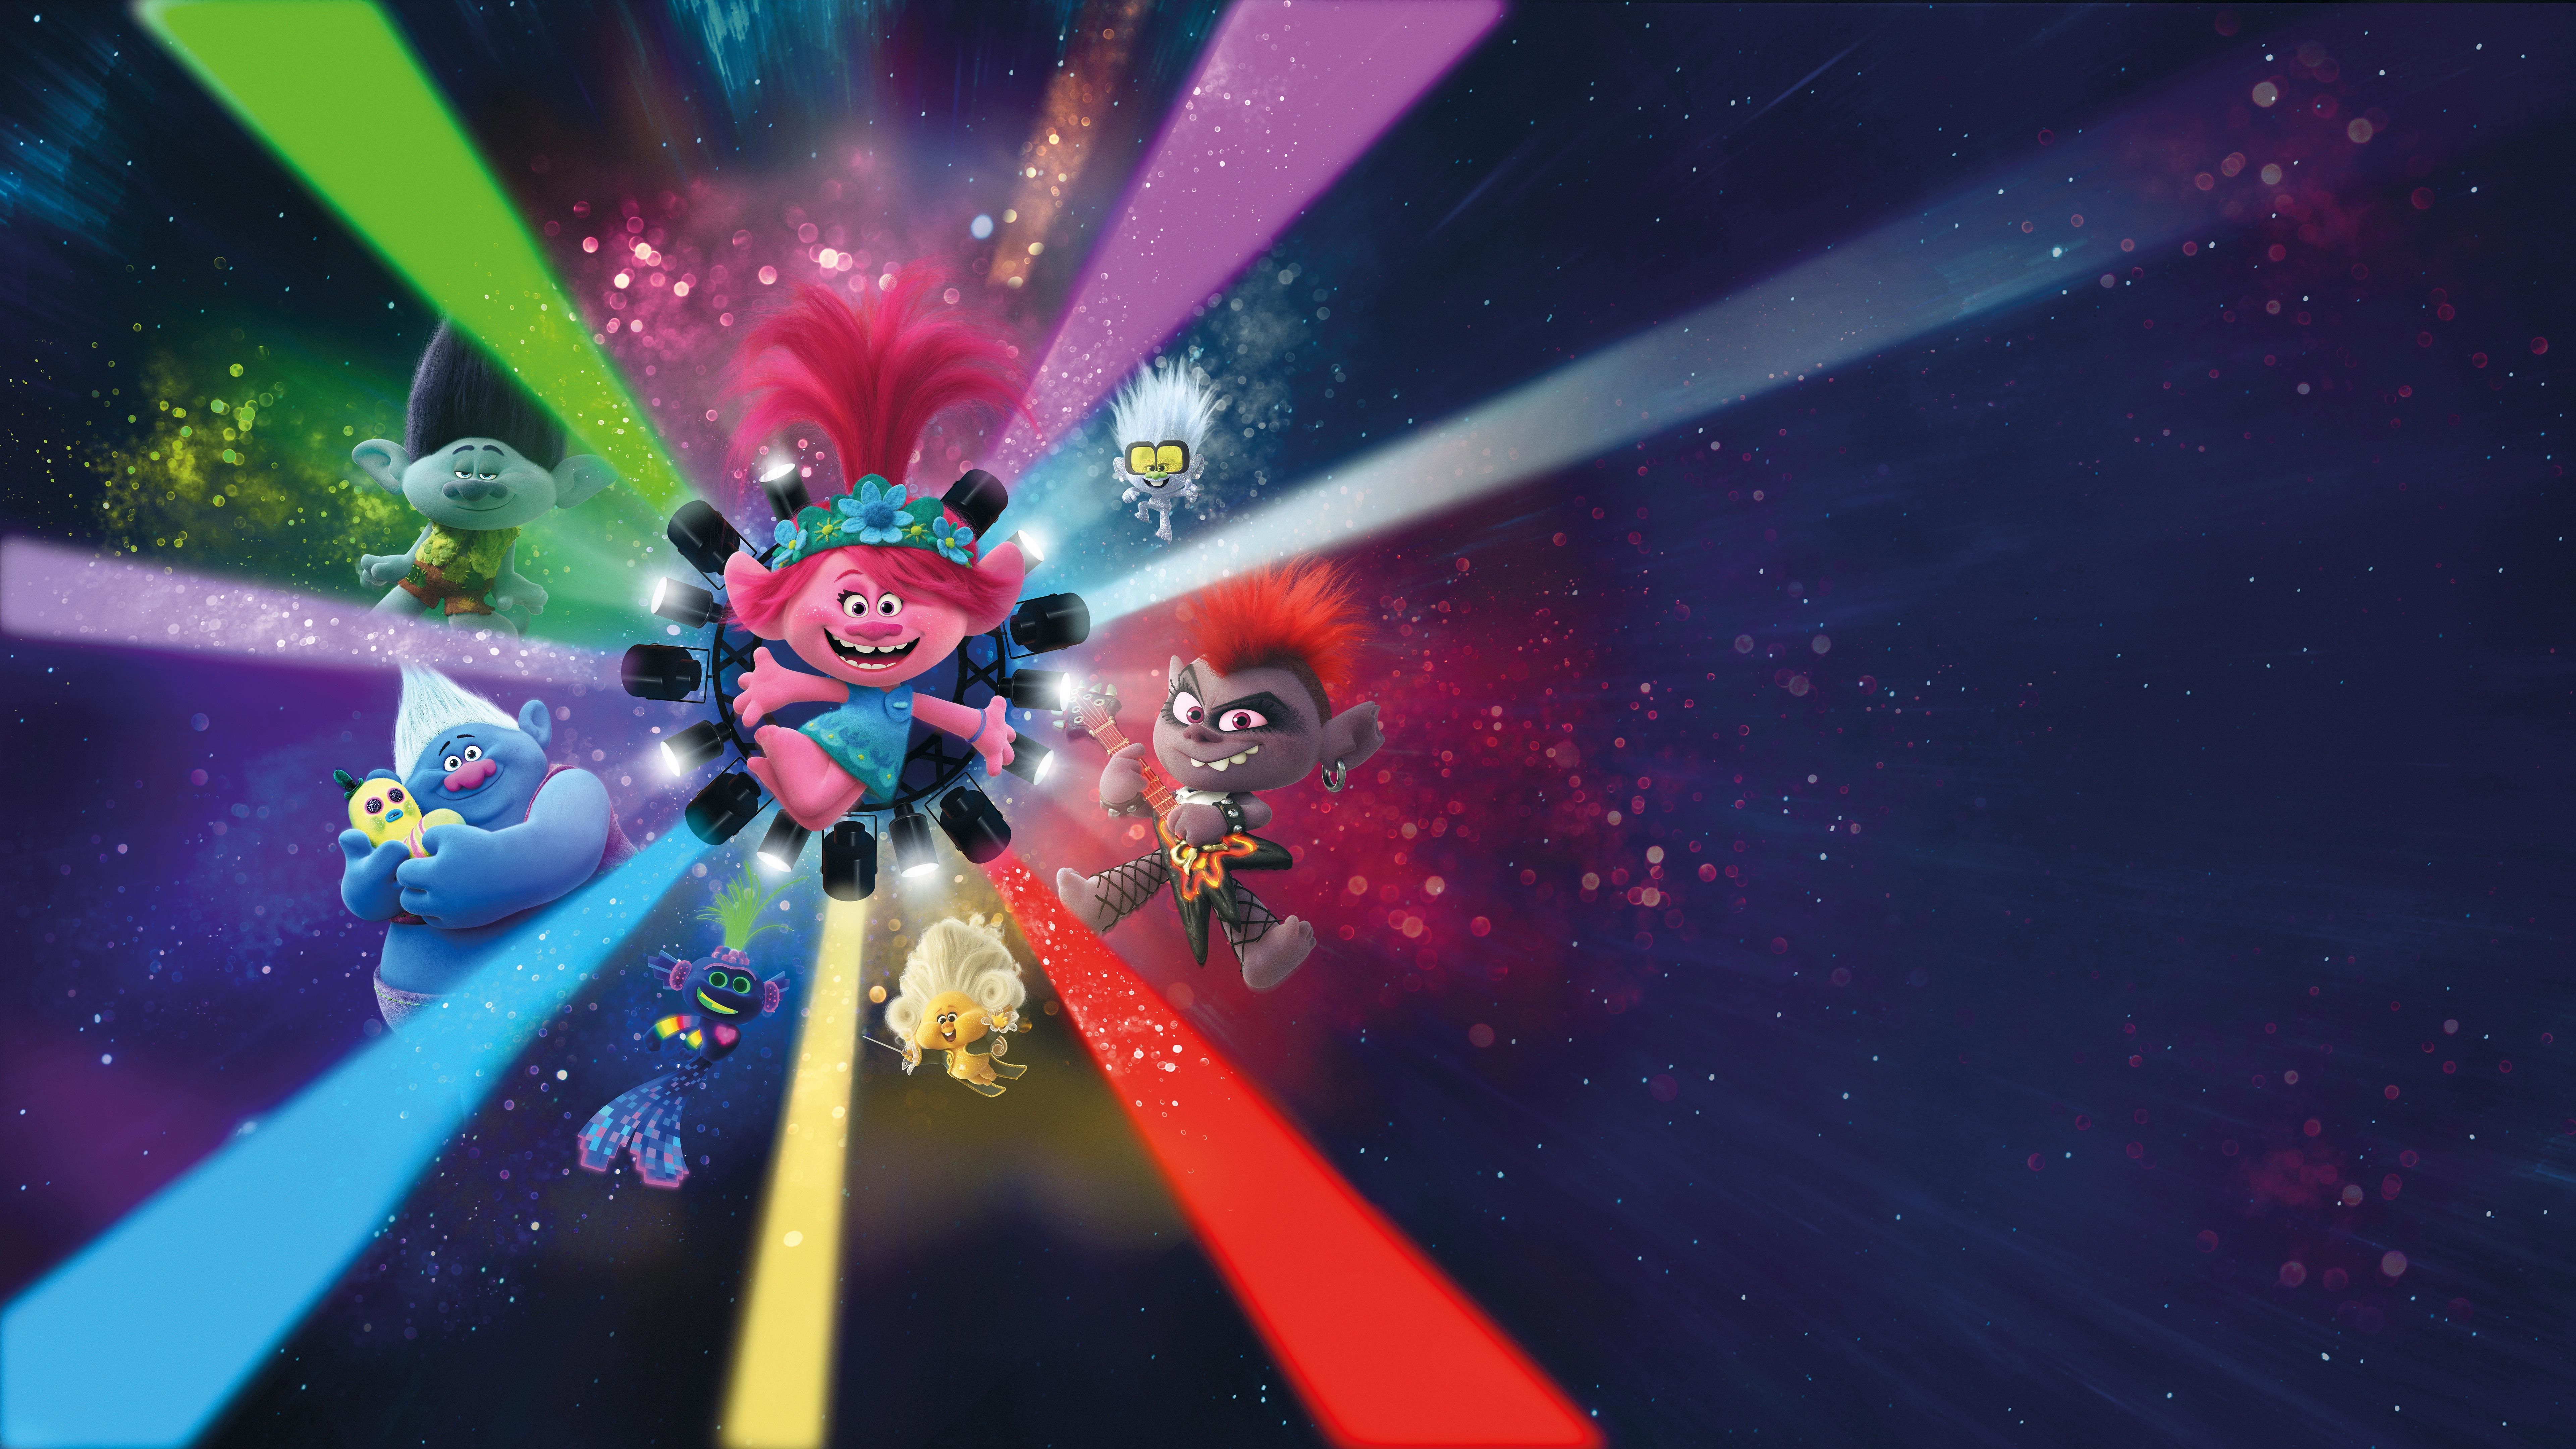 Trolls World Tour 8K Characters Wallpaper, HD Movies 4K Wallpaper, Image, Photo and Background